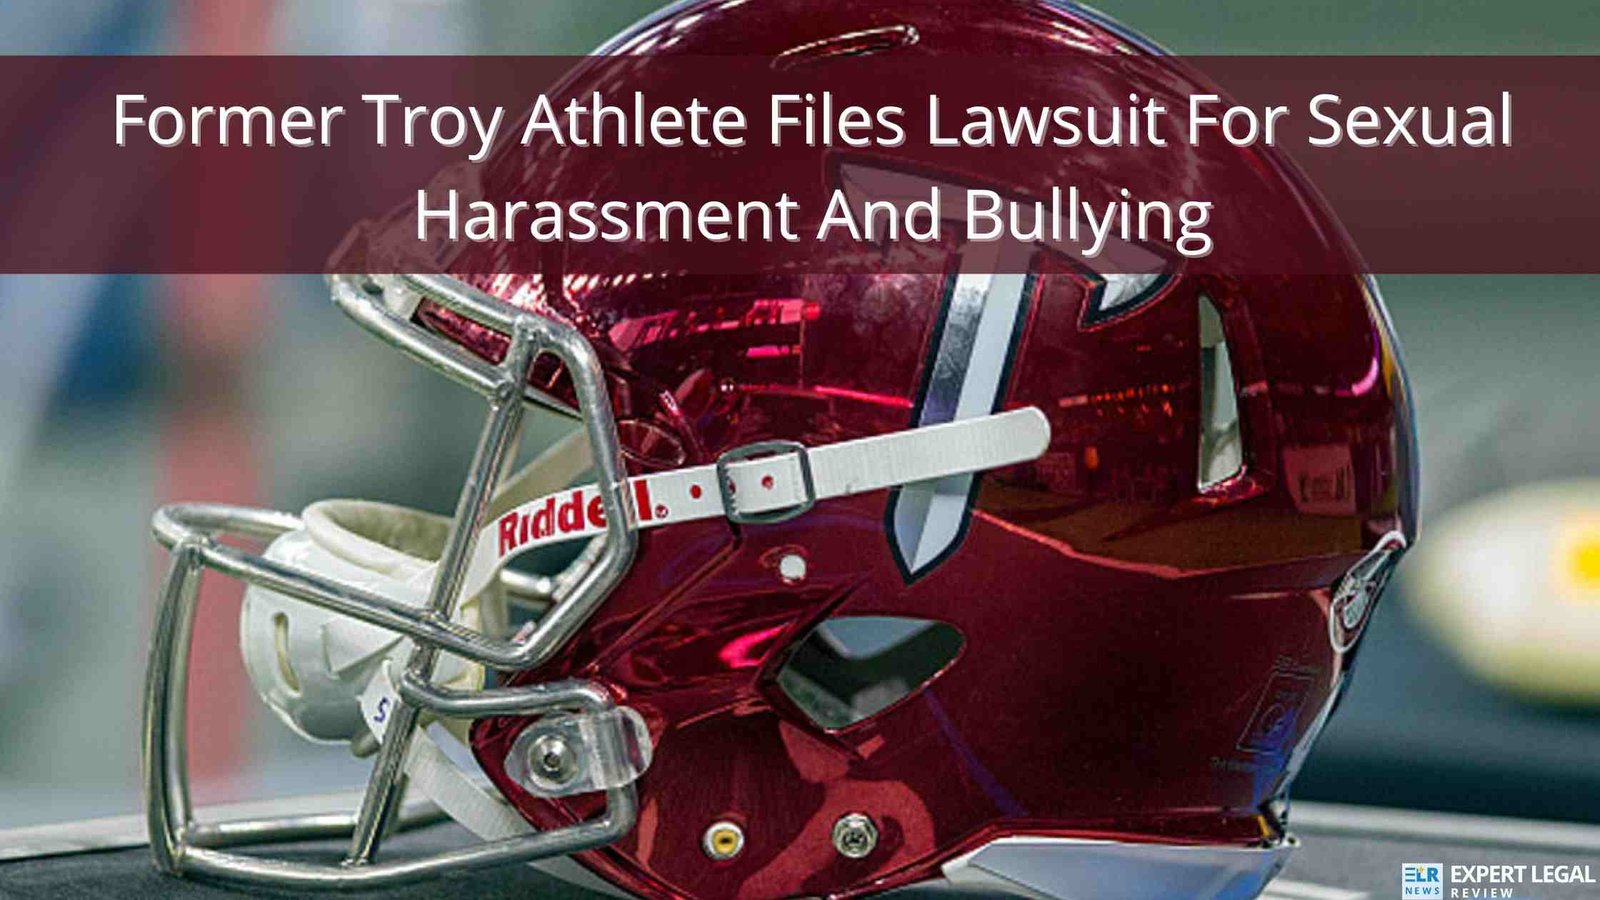 Former Troy Athlete Files Lawsuit For Sexual Harassment And Bullying